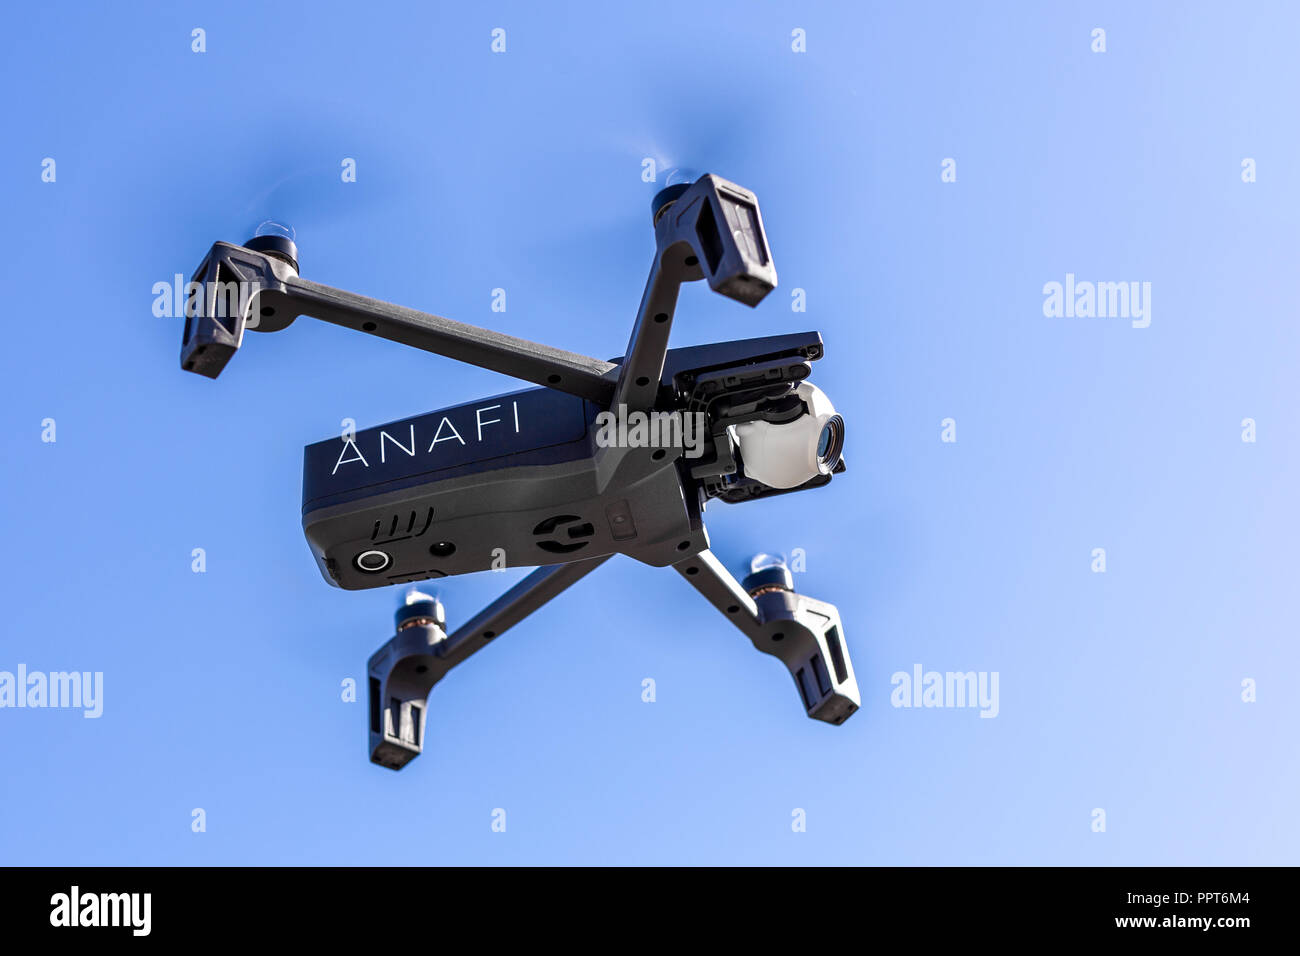 26th October 2018 - Kiev,Ukraine: New 2018 Parrot anafi drone flying  against blue clear sky on background on bright sunny day. Dji competitor  UAV. 21 Stock Photo - Alamy